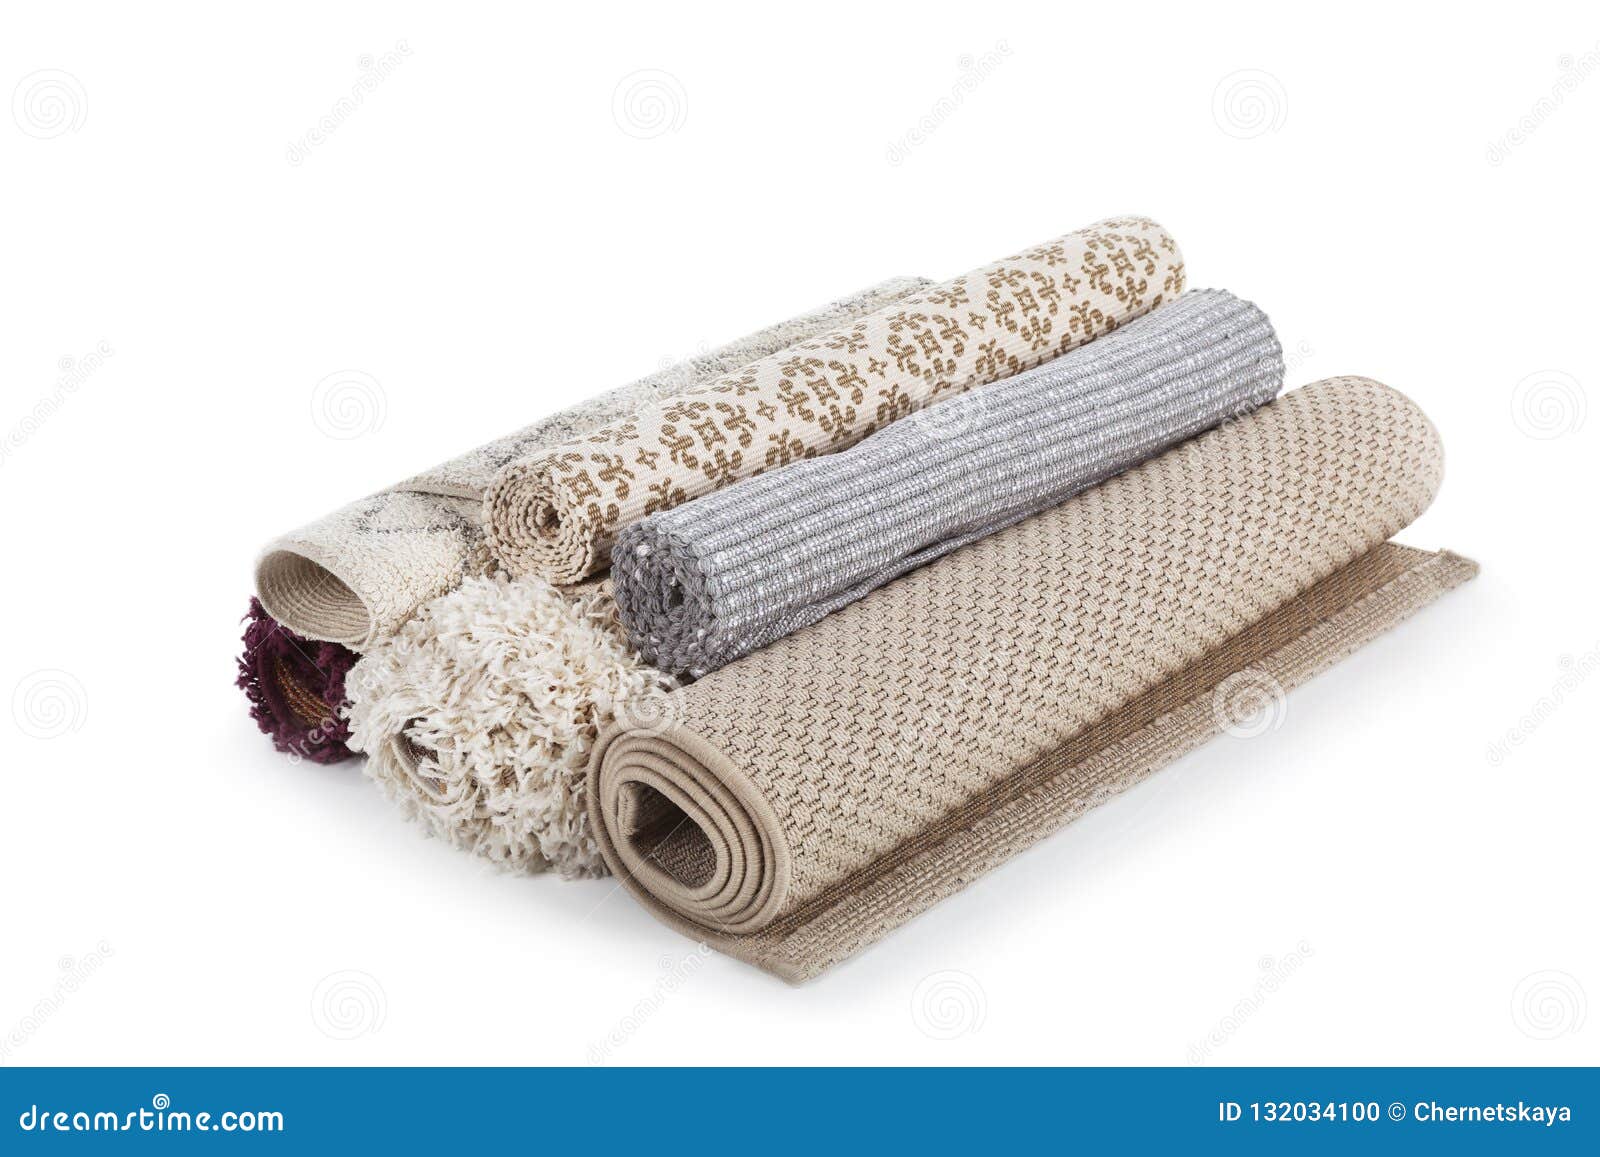 different rolled carpets on white background